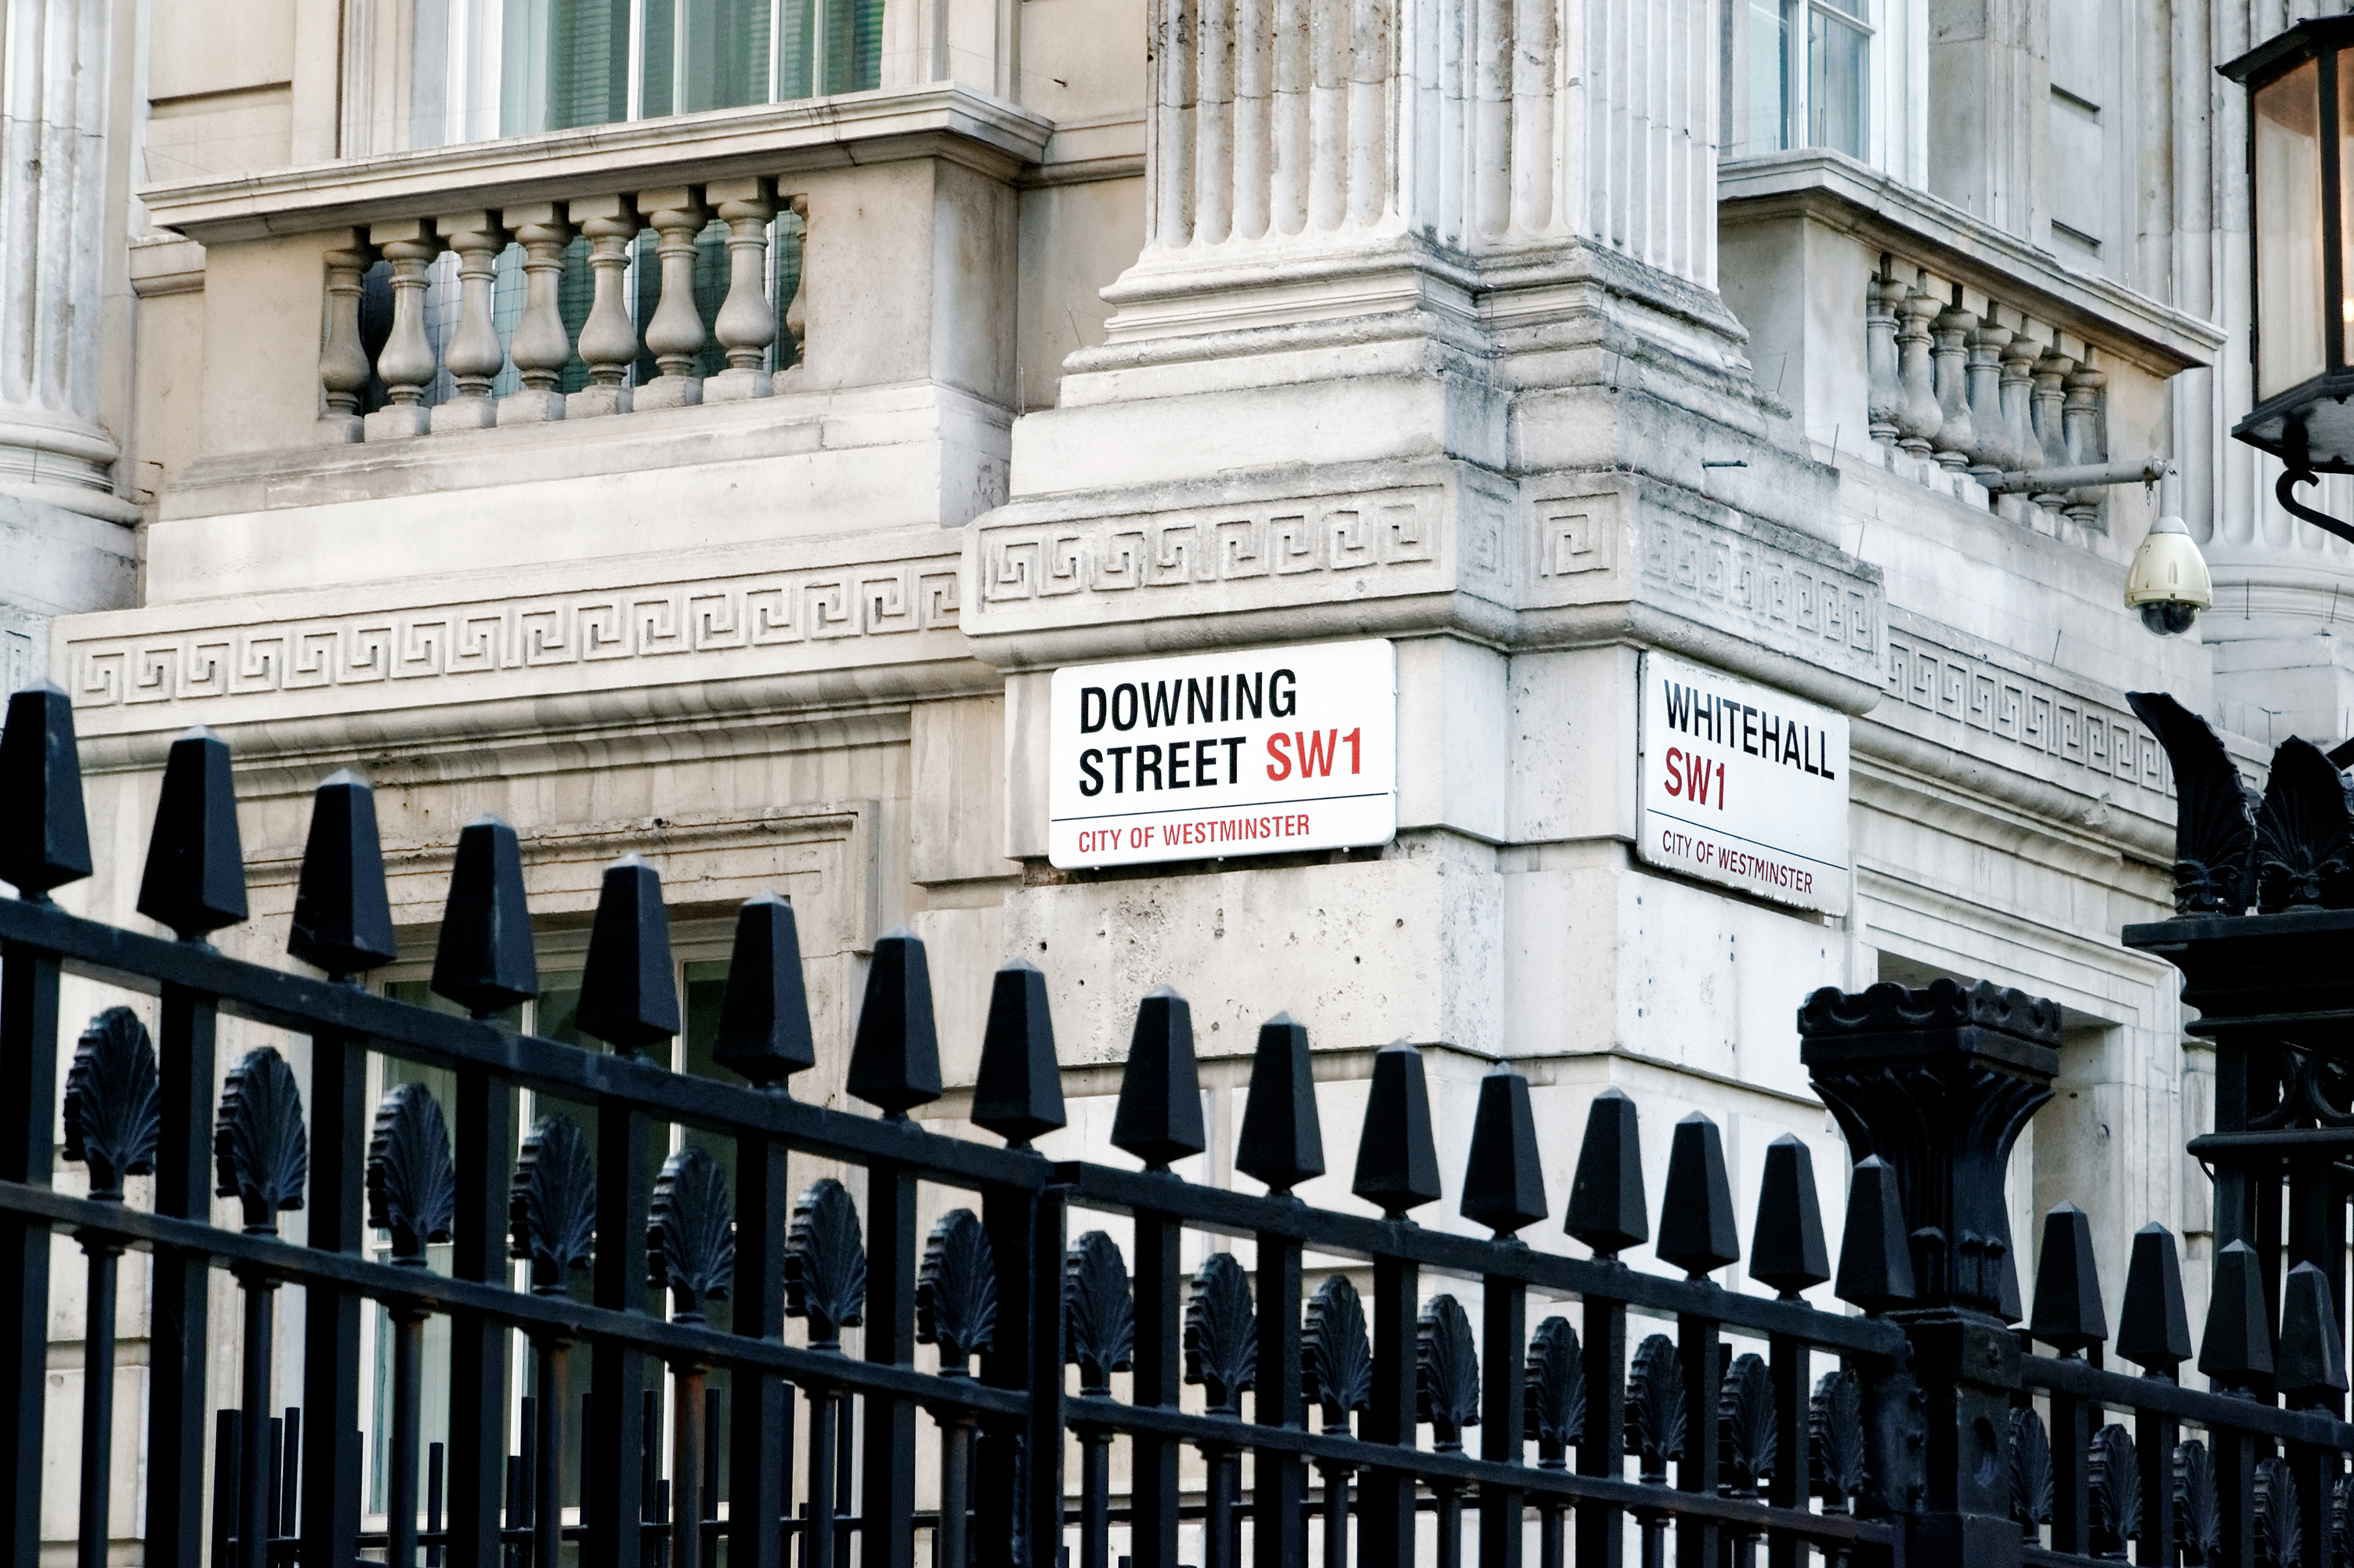 Road signs for Downing Street and Whitehall at the gates of Downing Street